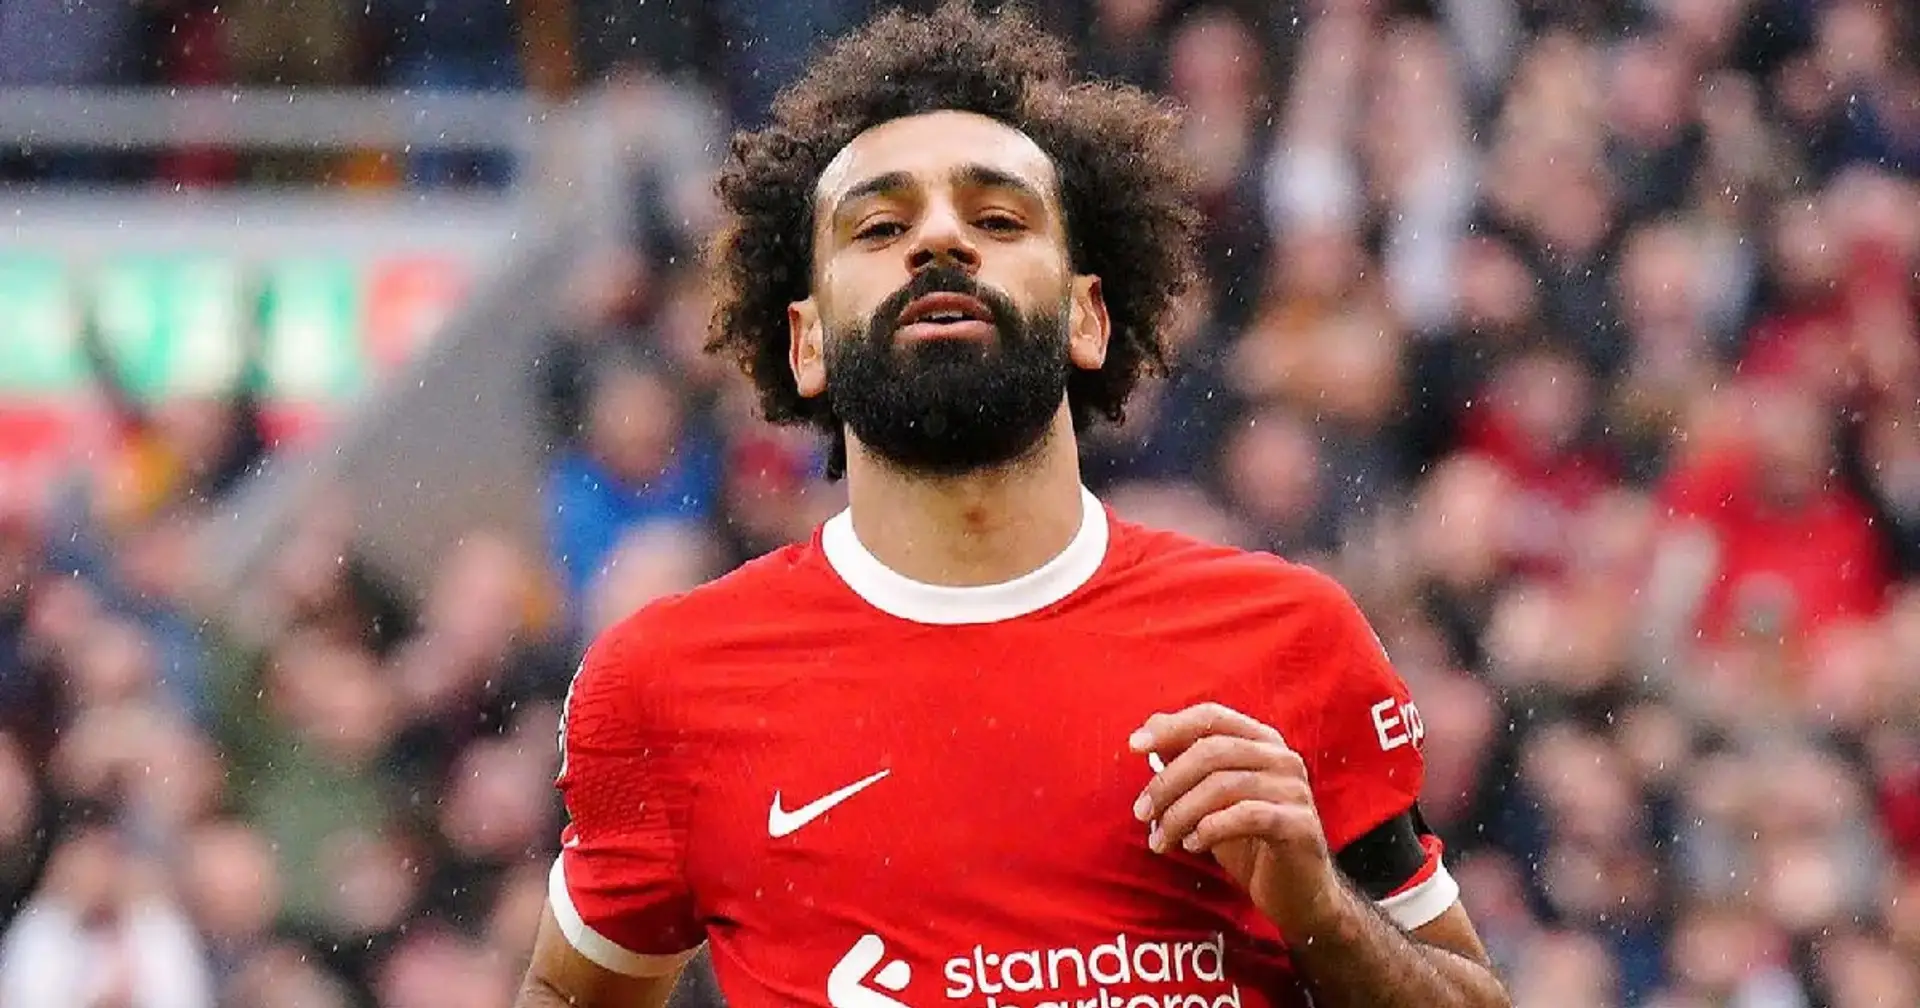 Liverpool expect Salah to stay at the club this summer (reliability: 5 stars)